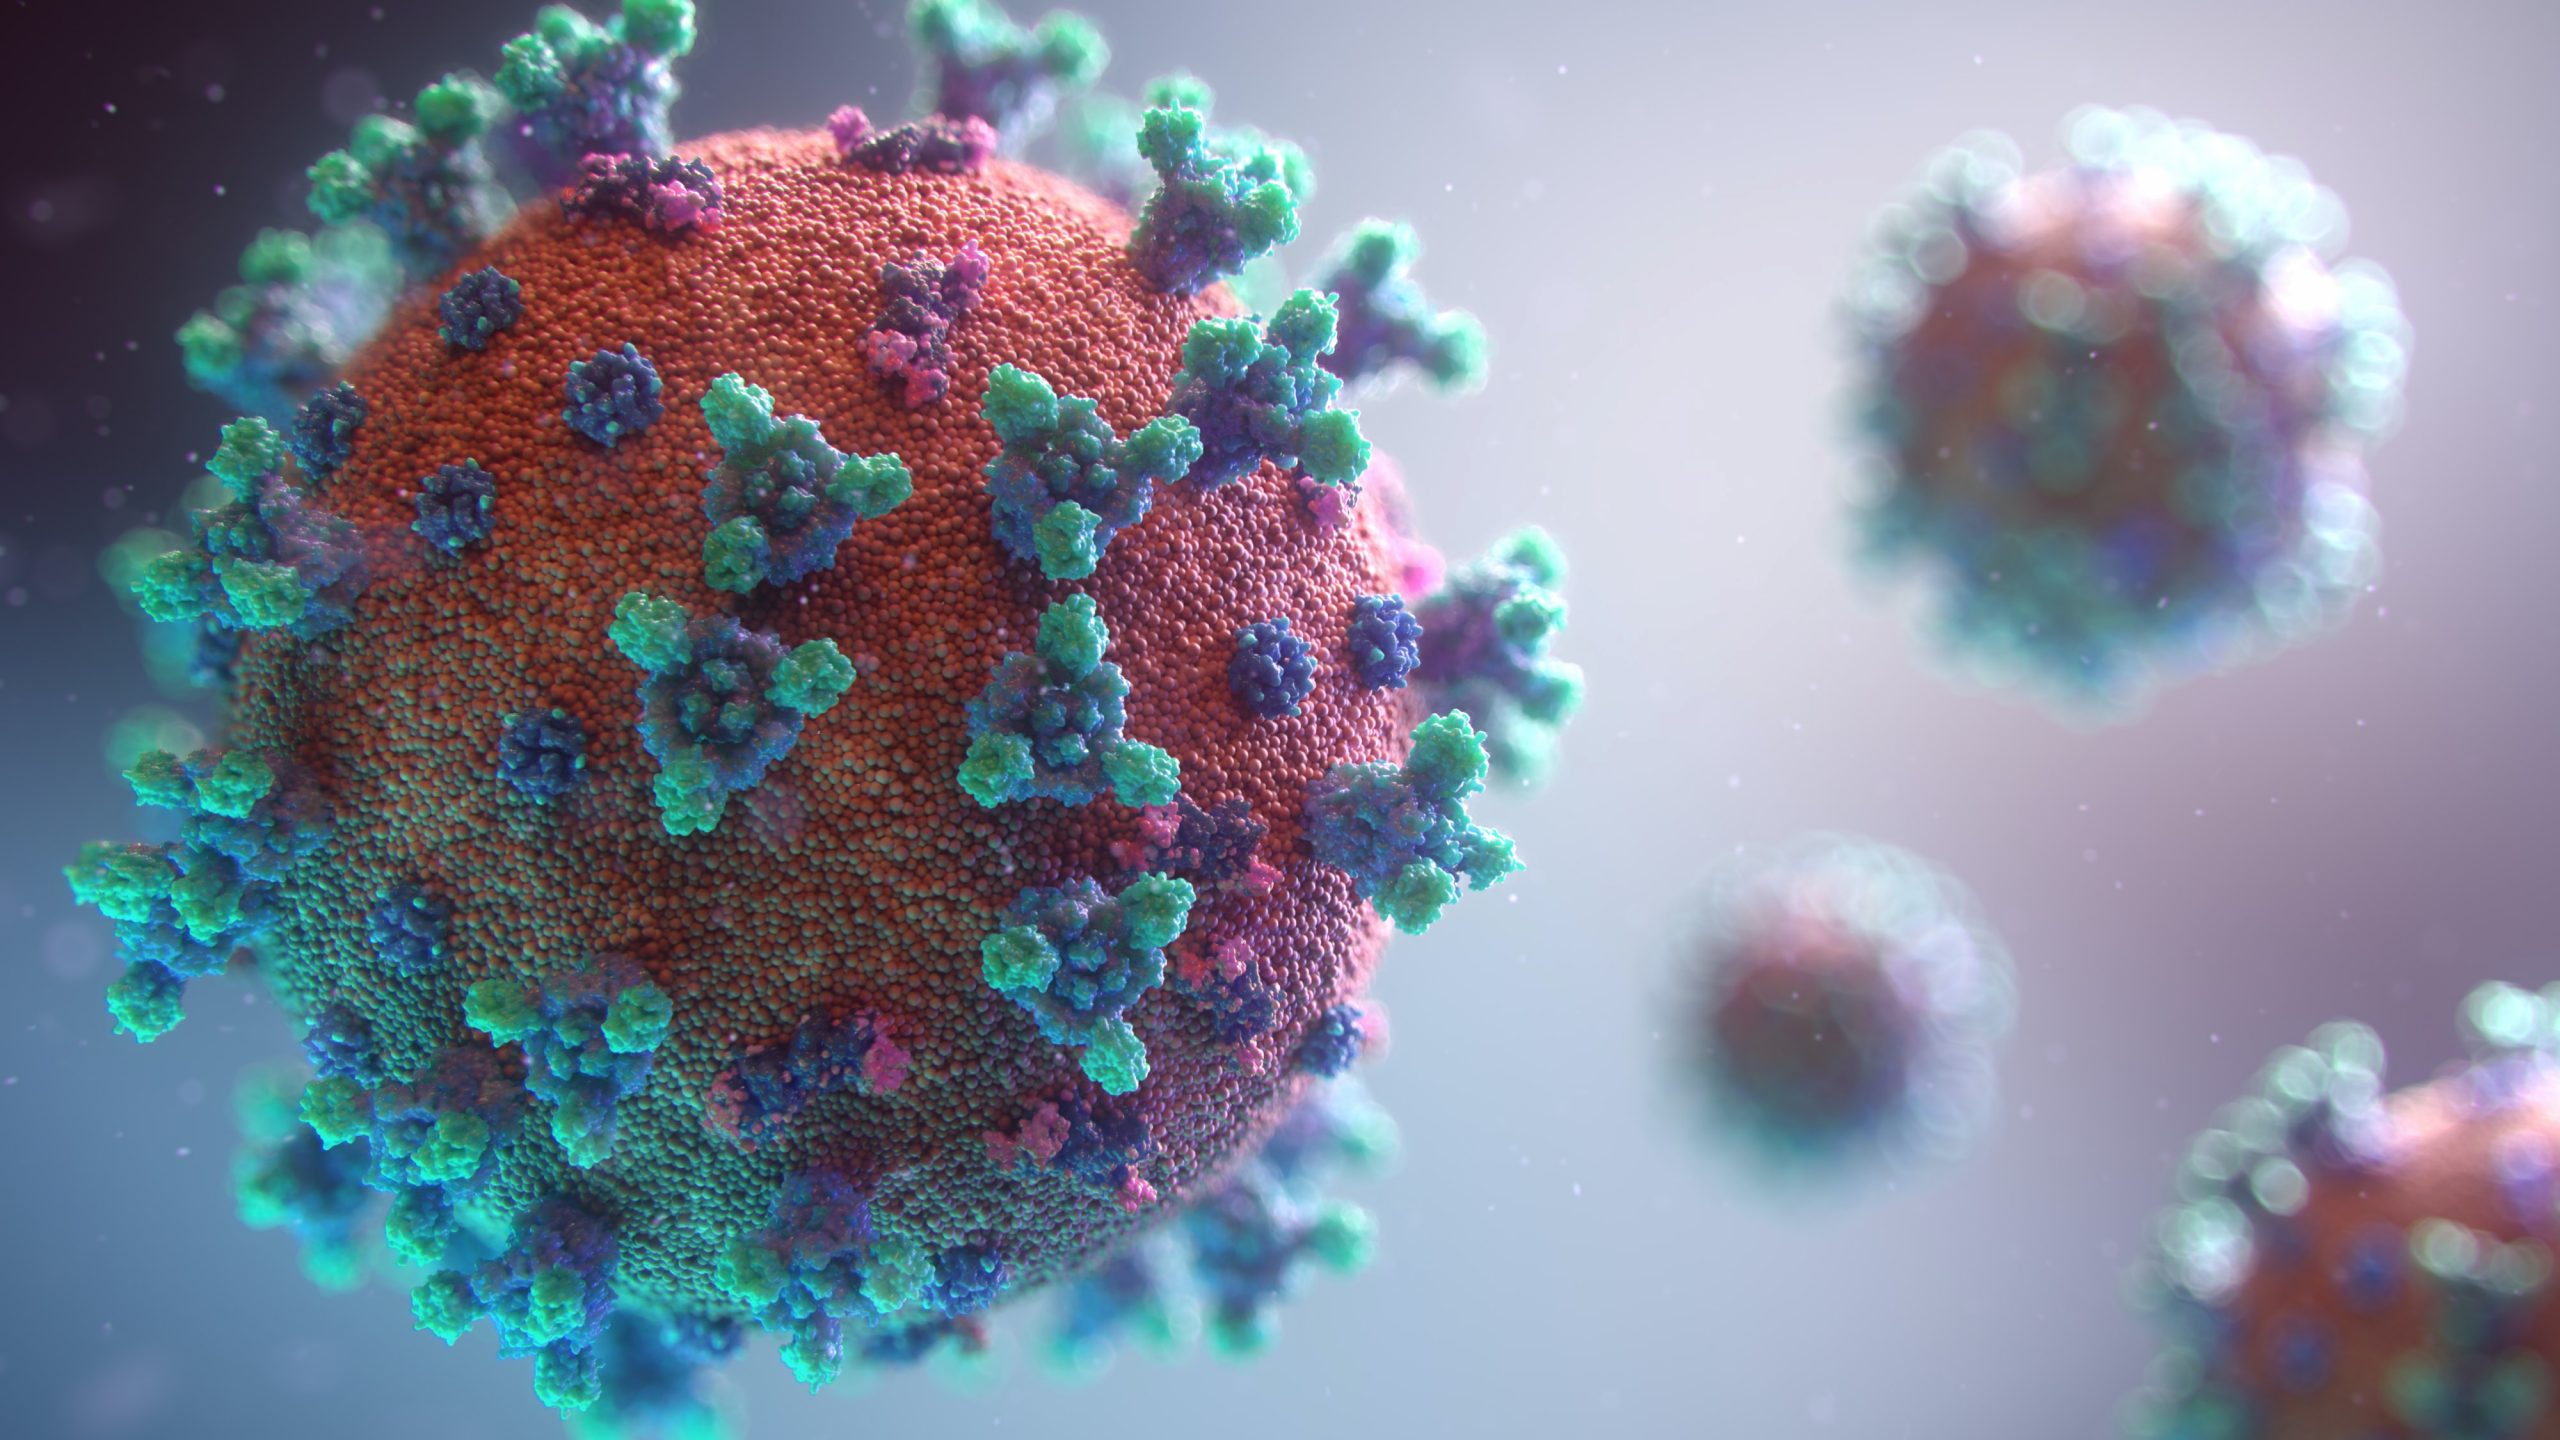 A digital illustration shows a rendering of what the Covid virus strain looks like: a pink spherical ball with blue spikes growing off of it